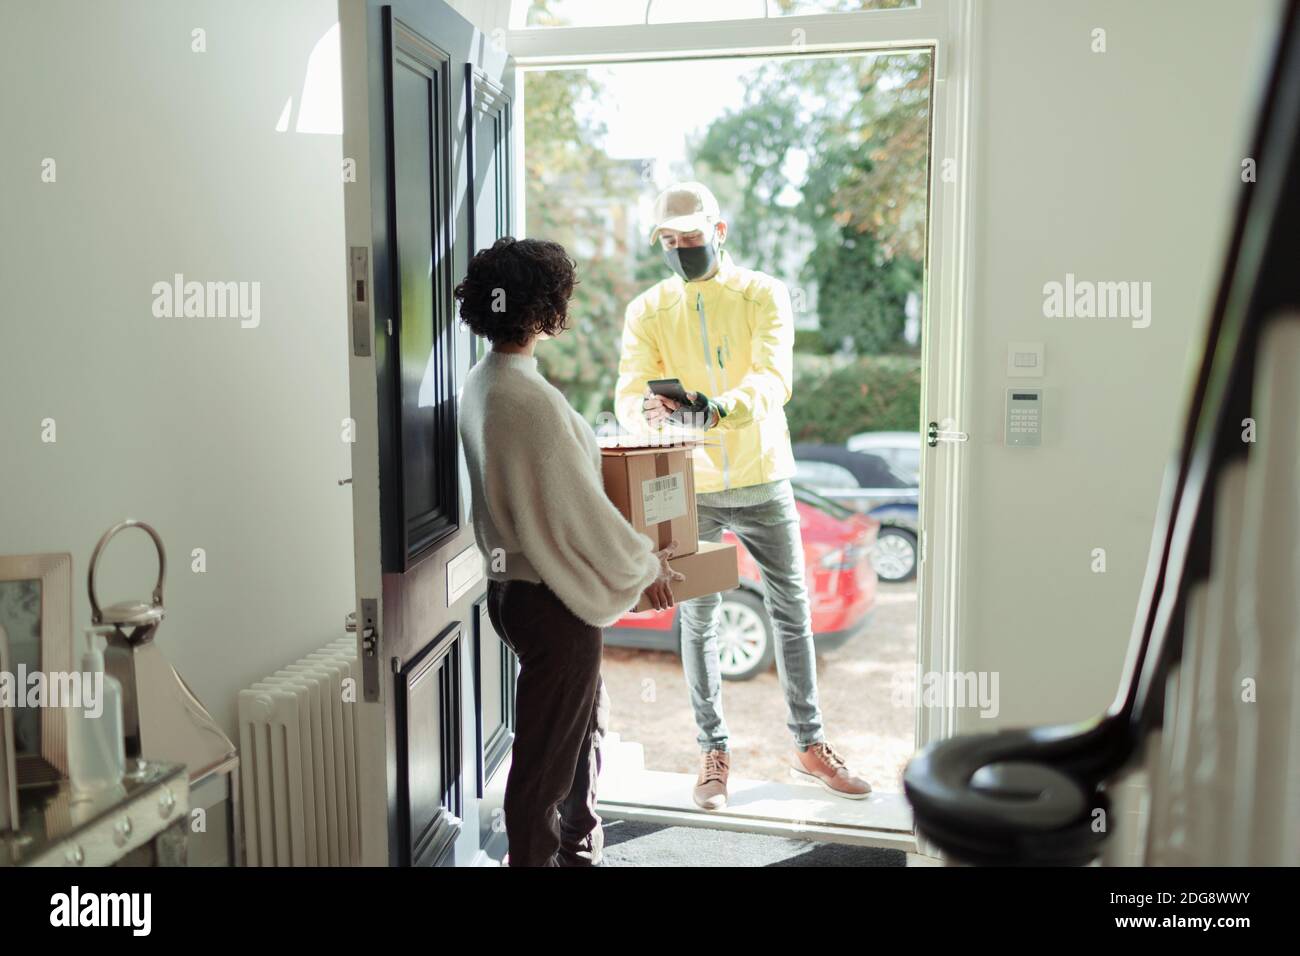 Woman receiving package from delivery man in face mask at front door Stock Photo